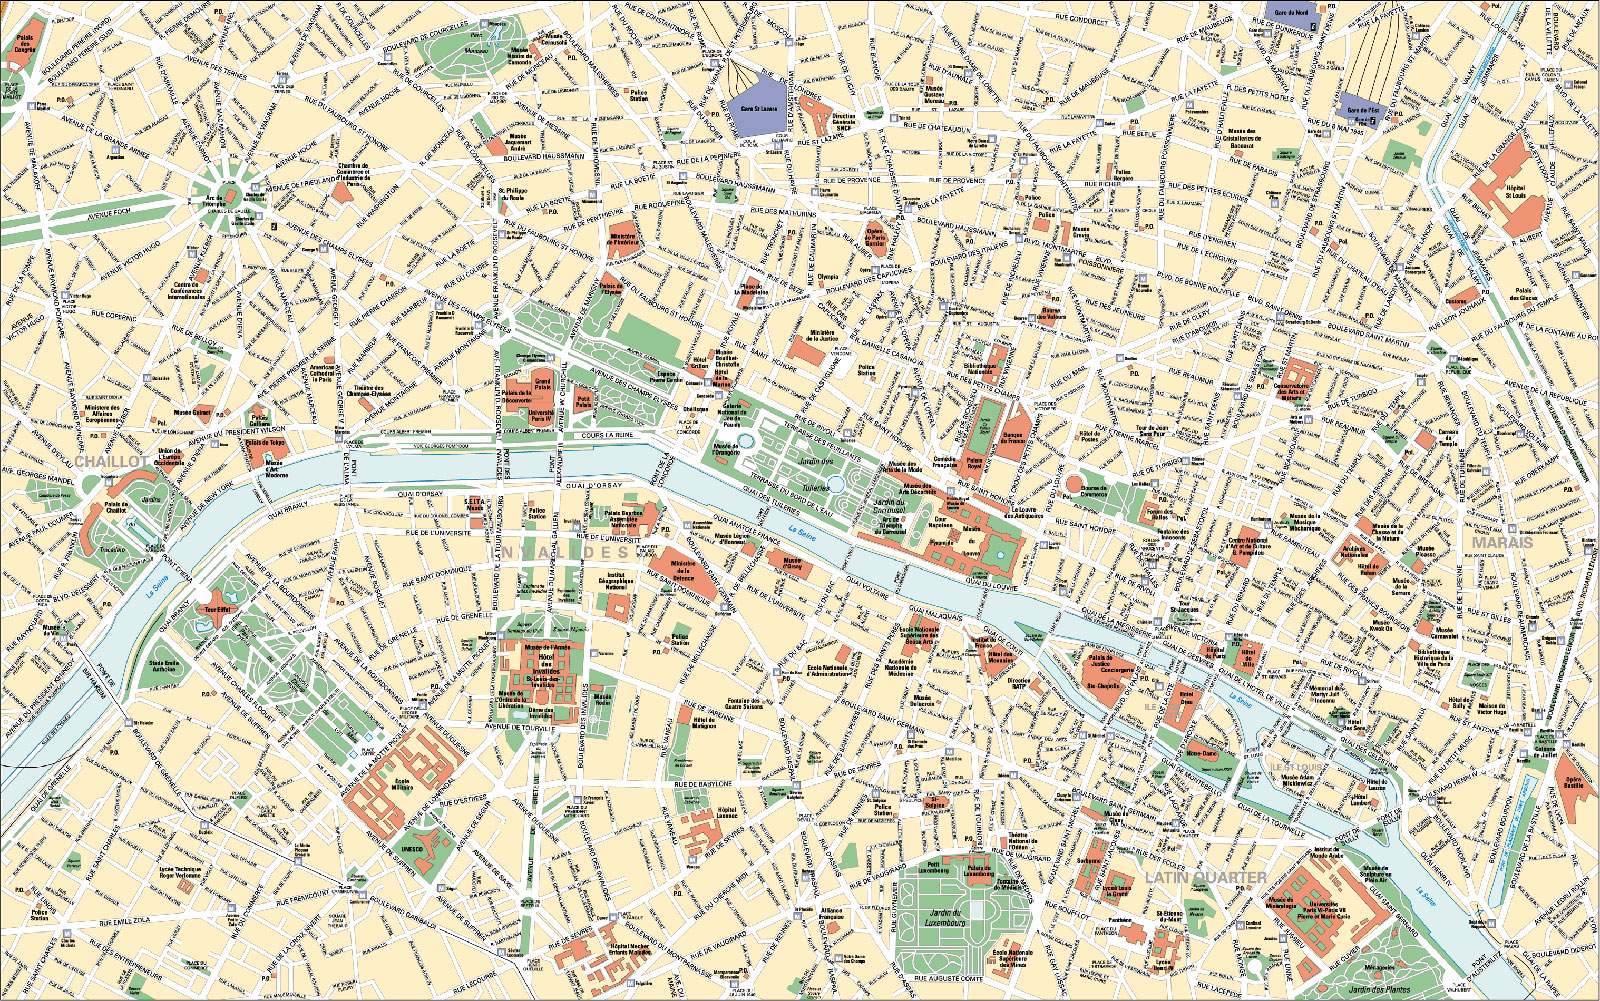 large-paris-maps-for-free-download-and-print-high-resolution-and